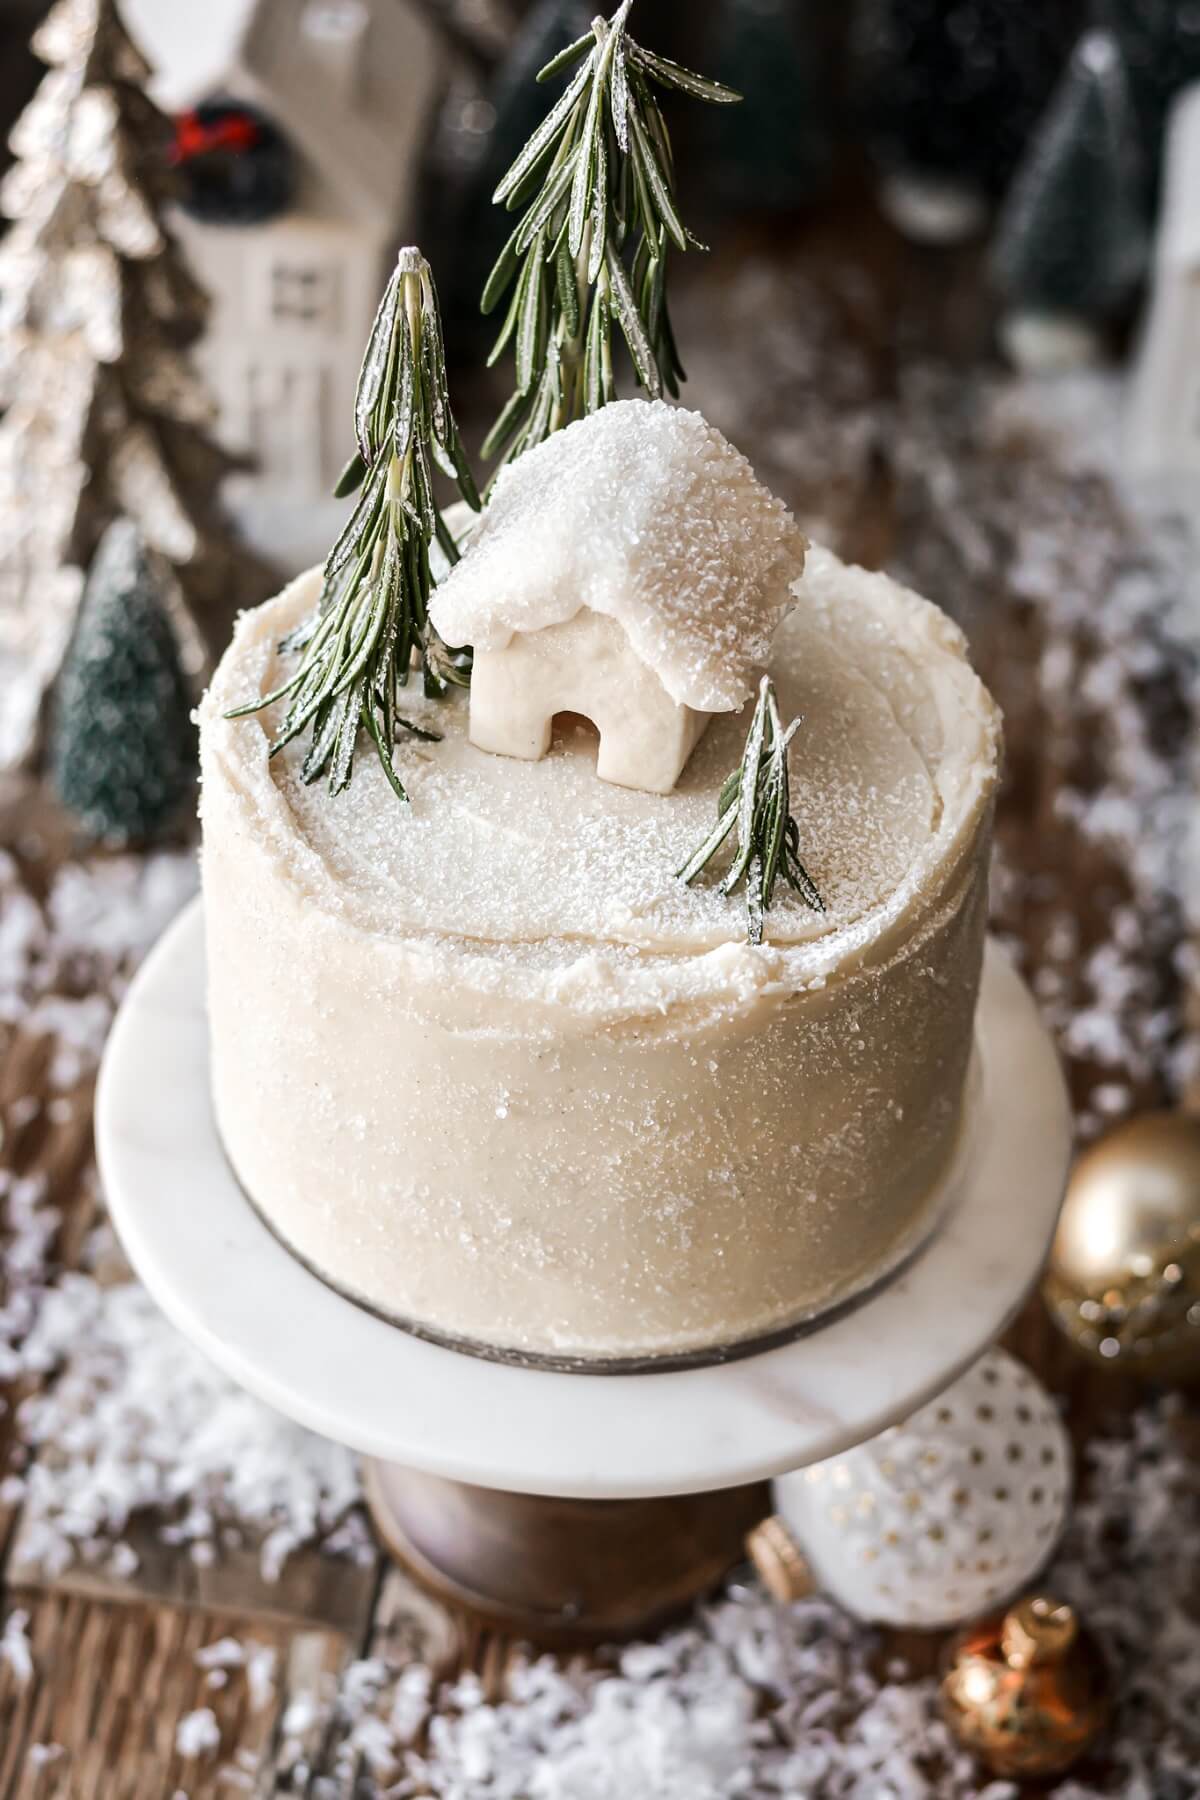 Mascarpone buttercream covered in sparkling sugar, on a gingerbread cake.